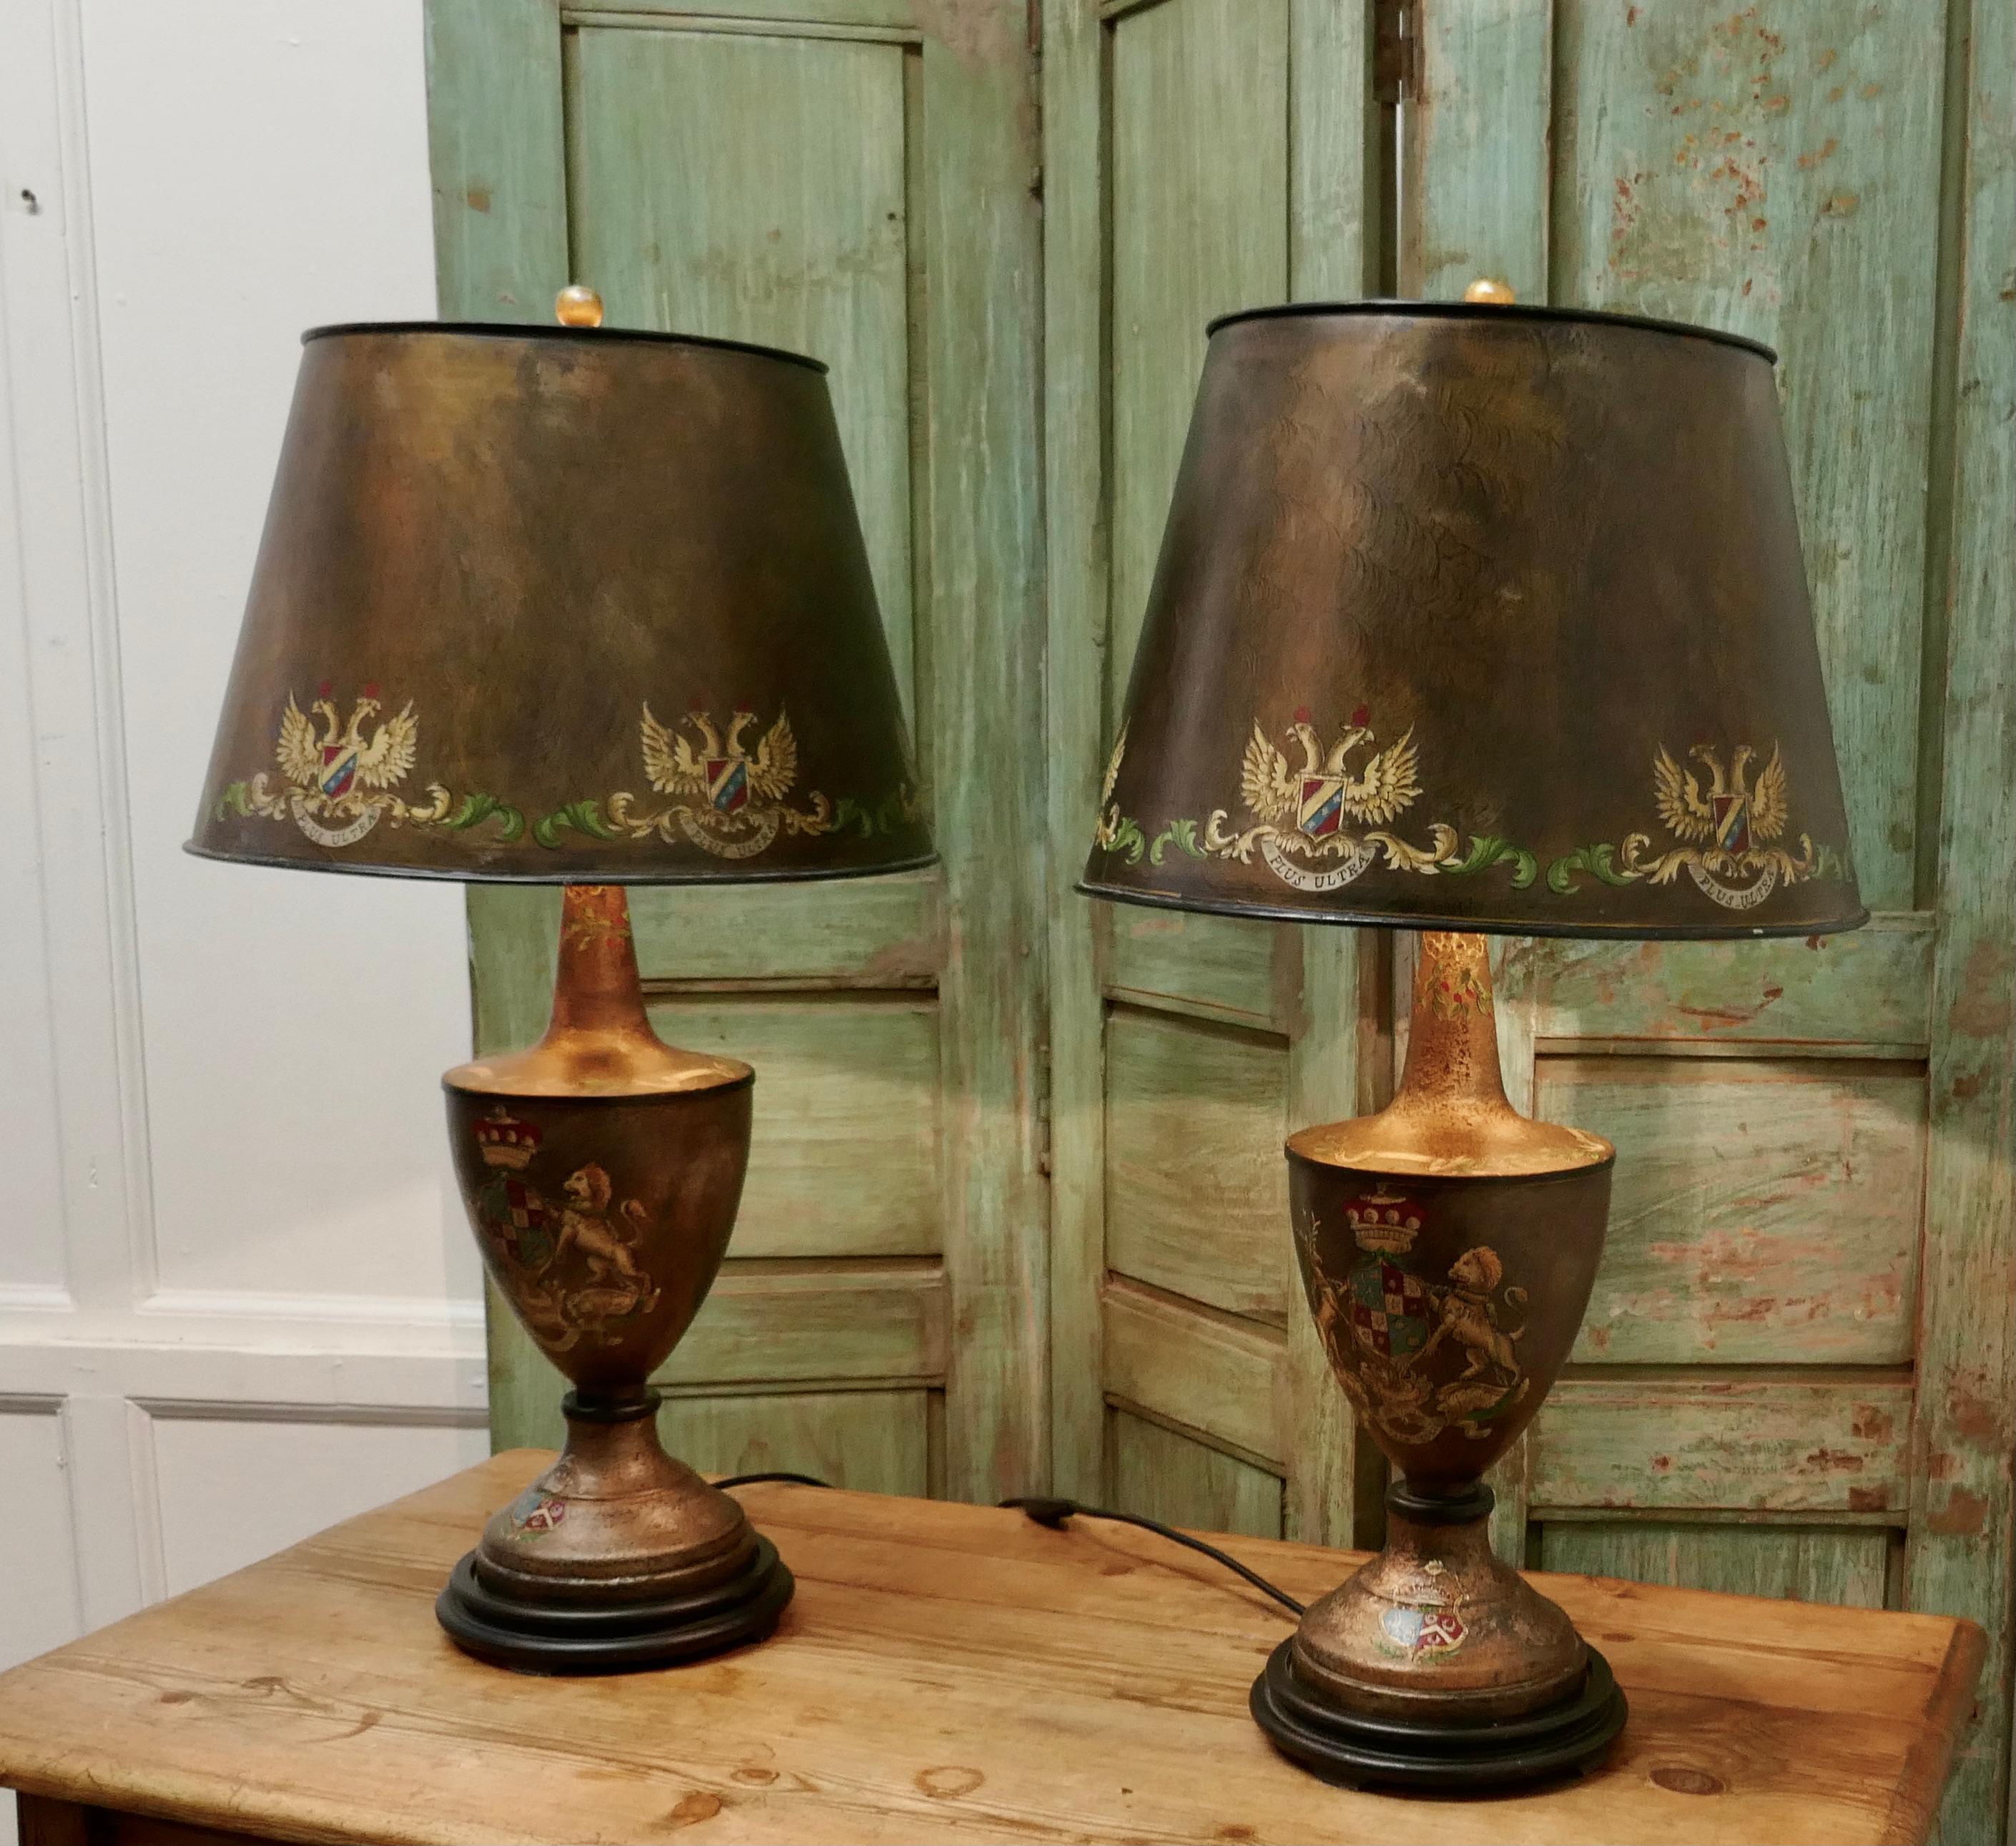 A Pair of Large Bronze Coloured Toleware Table Lamps

These Large Stunning Lamps have an Armorial Crest theme they have matching shades, both lamps and shades have a crackle glaze finish and are hand painted 
The lamps are fully wired and in very